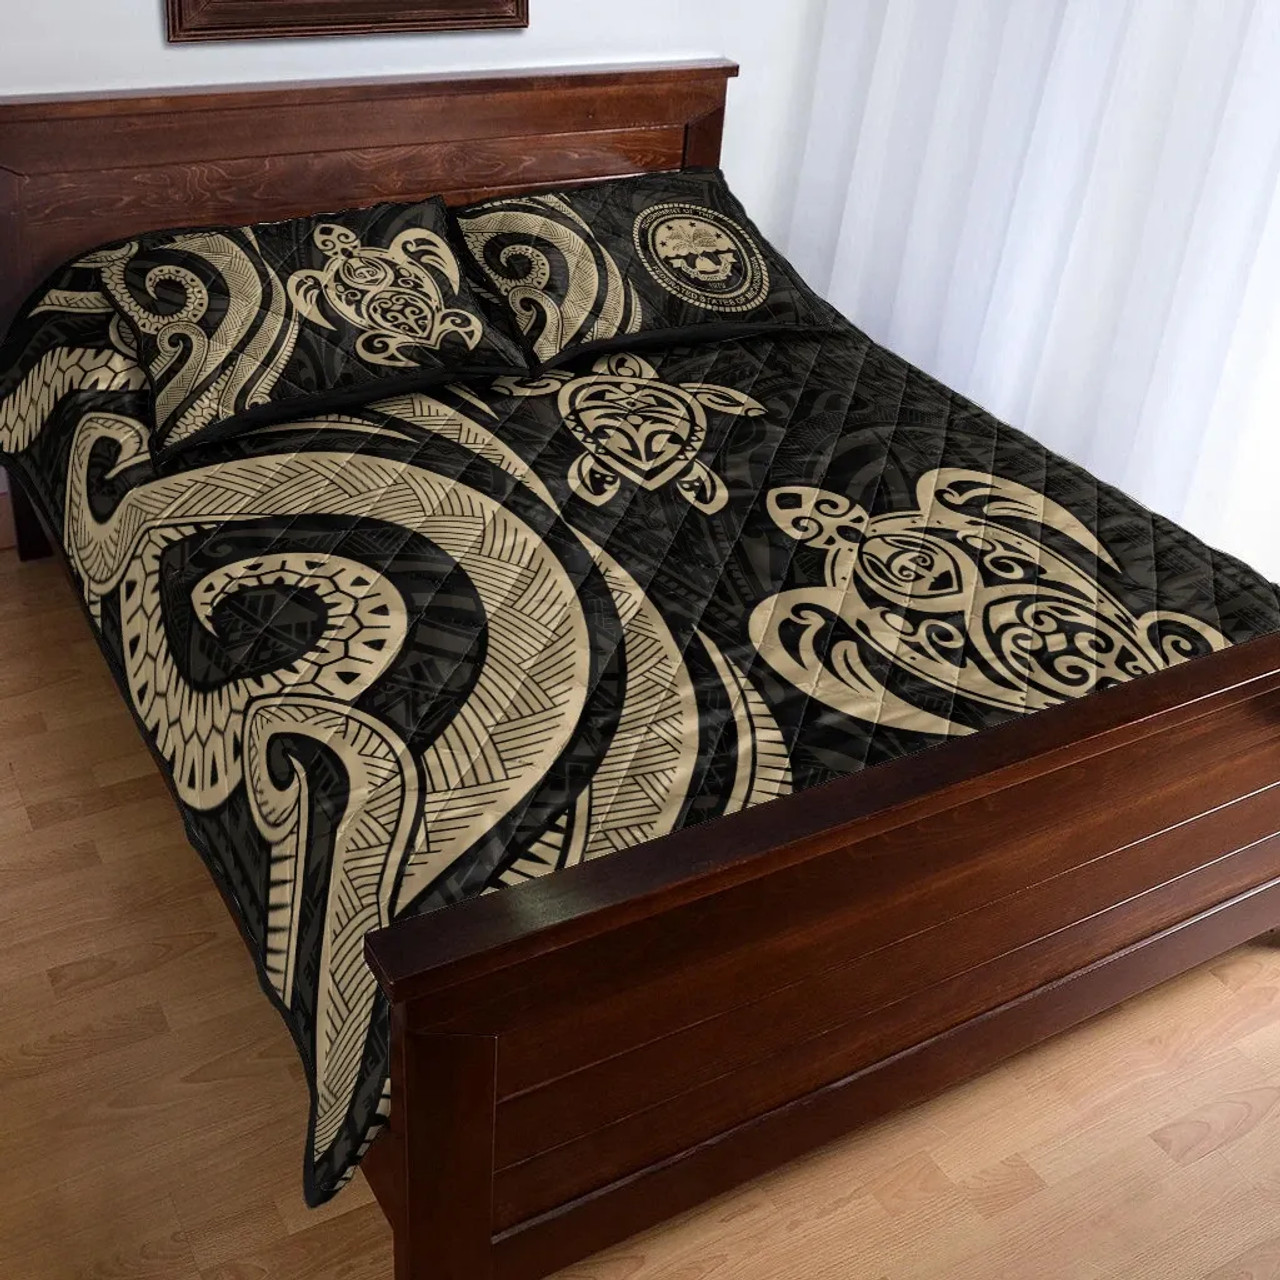 Federated States of Micronesia Quilt Bed Set - Gold Tentacle Turtle 4